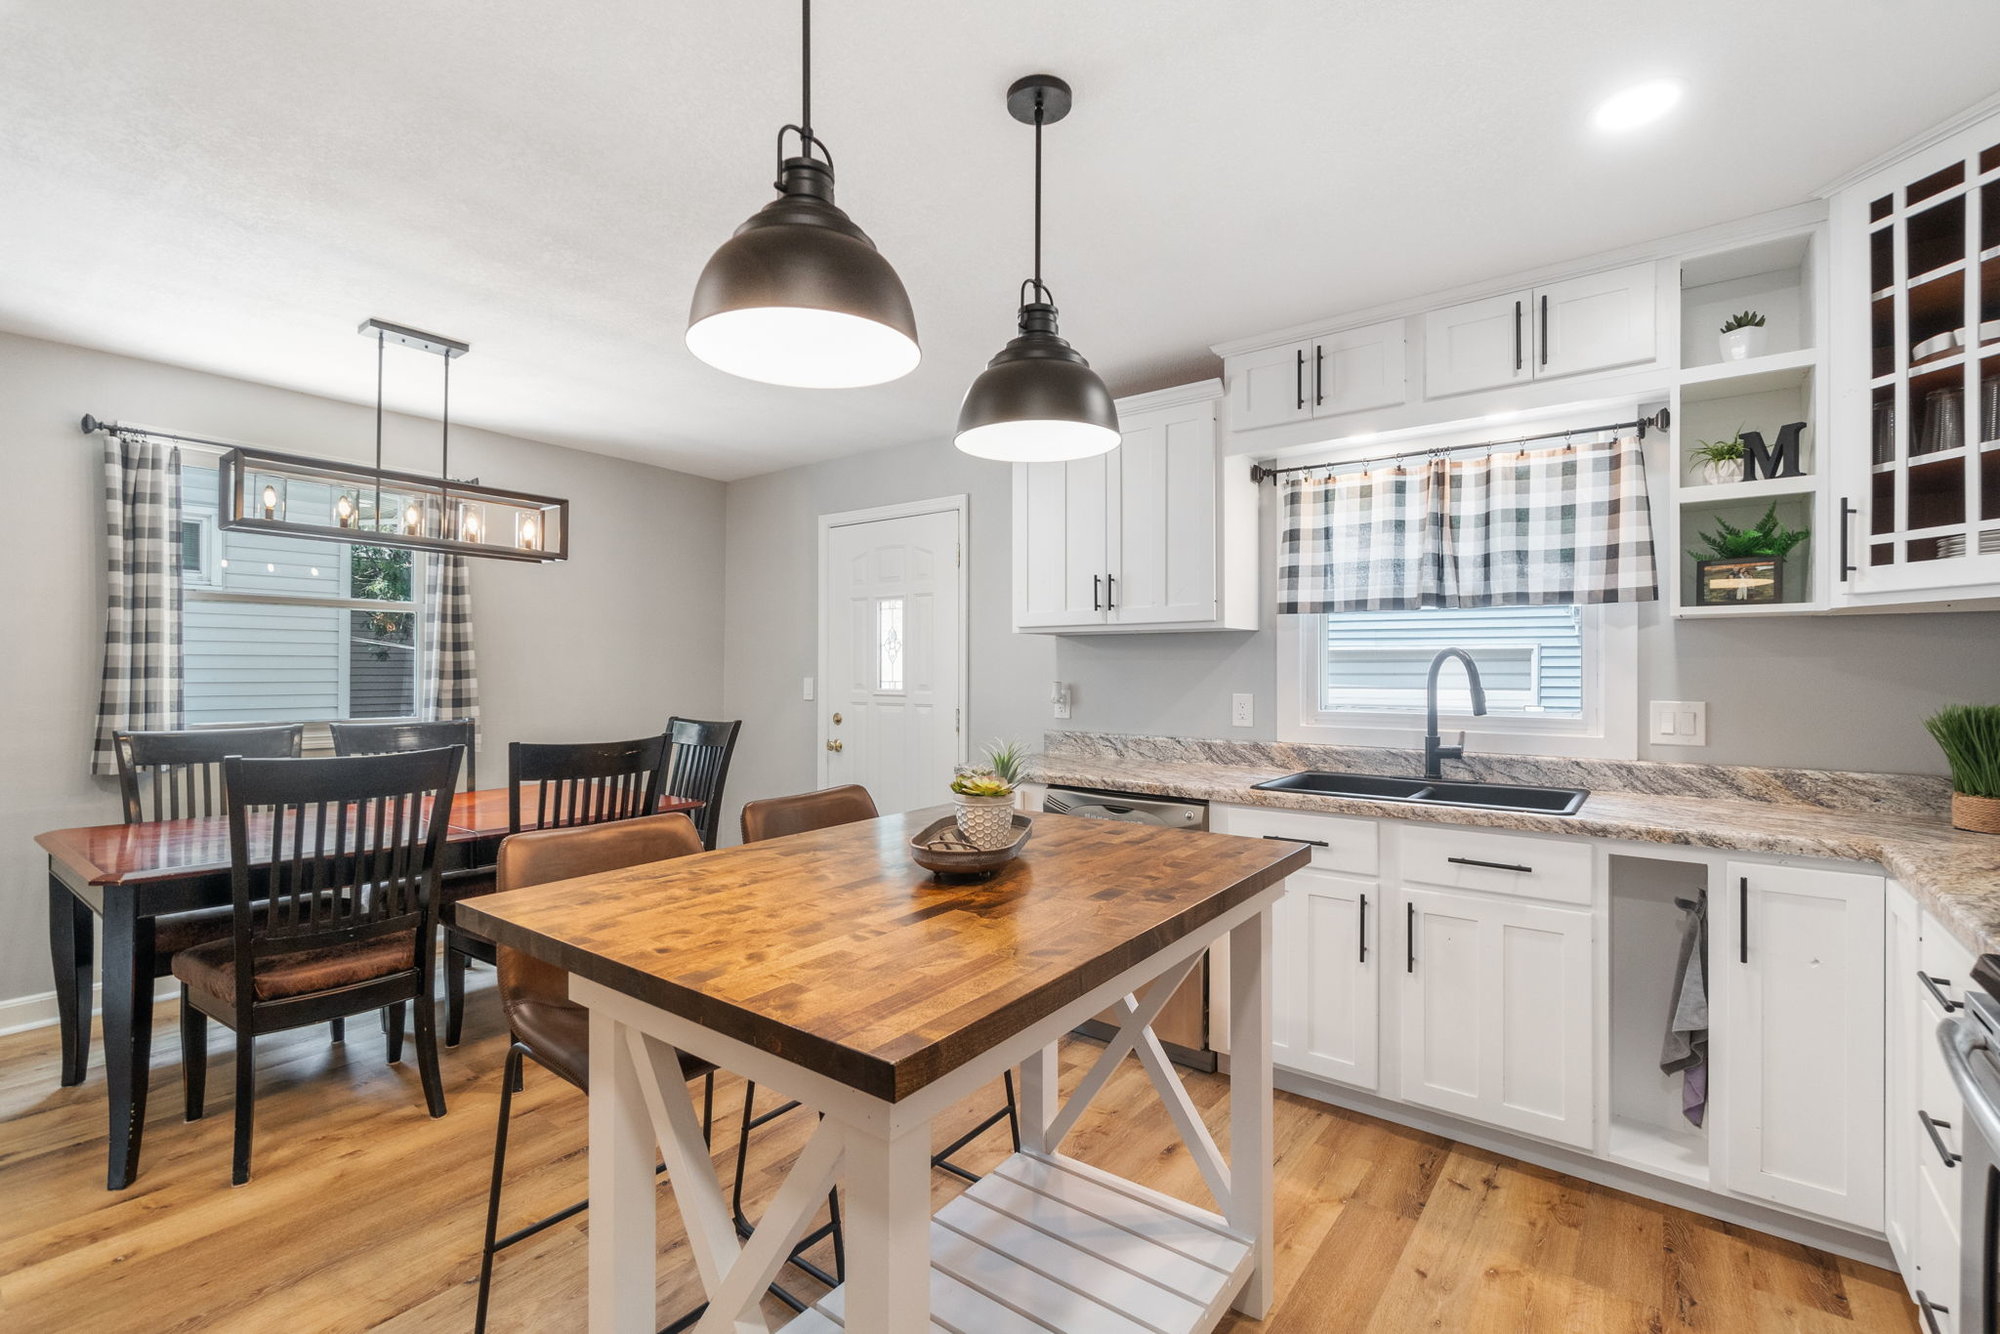 The Renovated Ranch with a Modern Beautiful Industrial Kitchen - 1627 Plymouth St., Waterloo